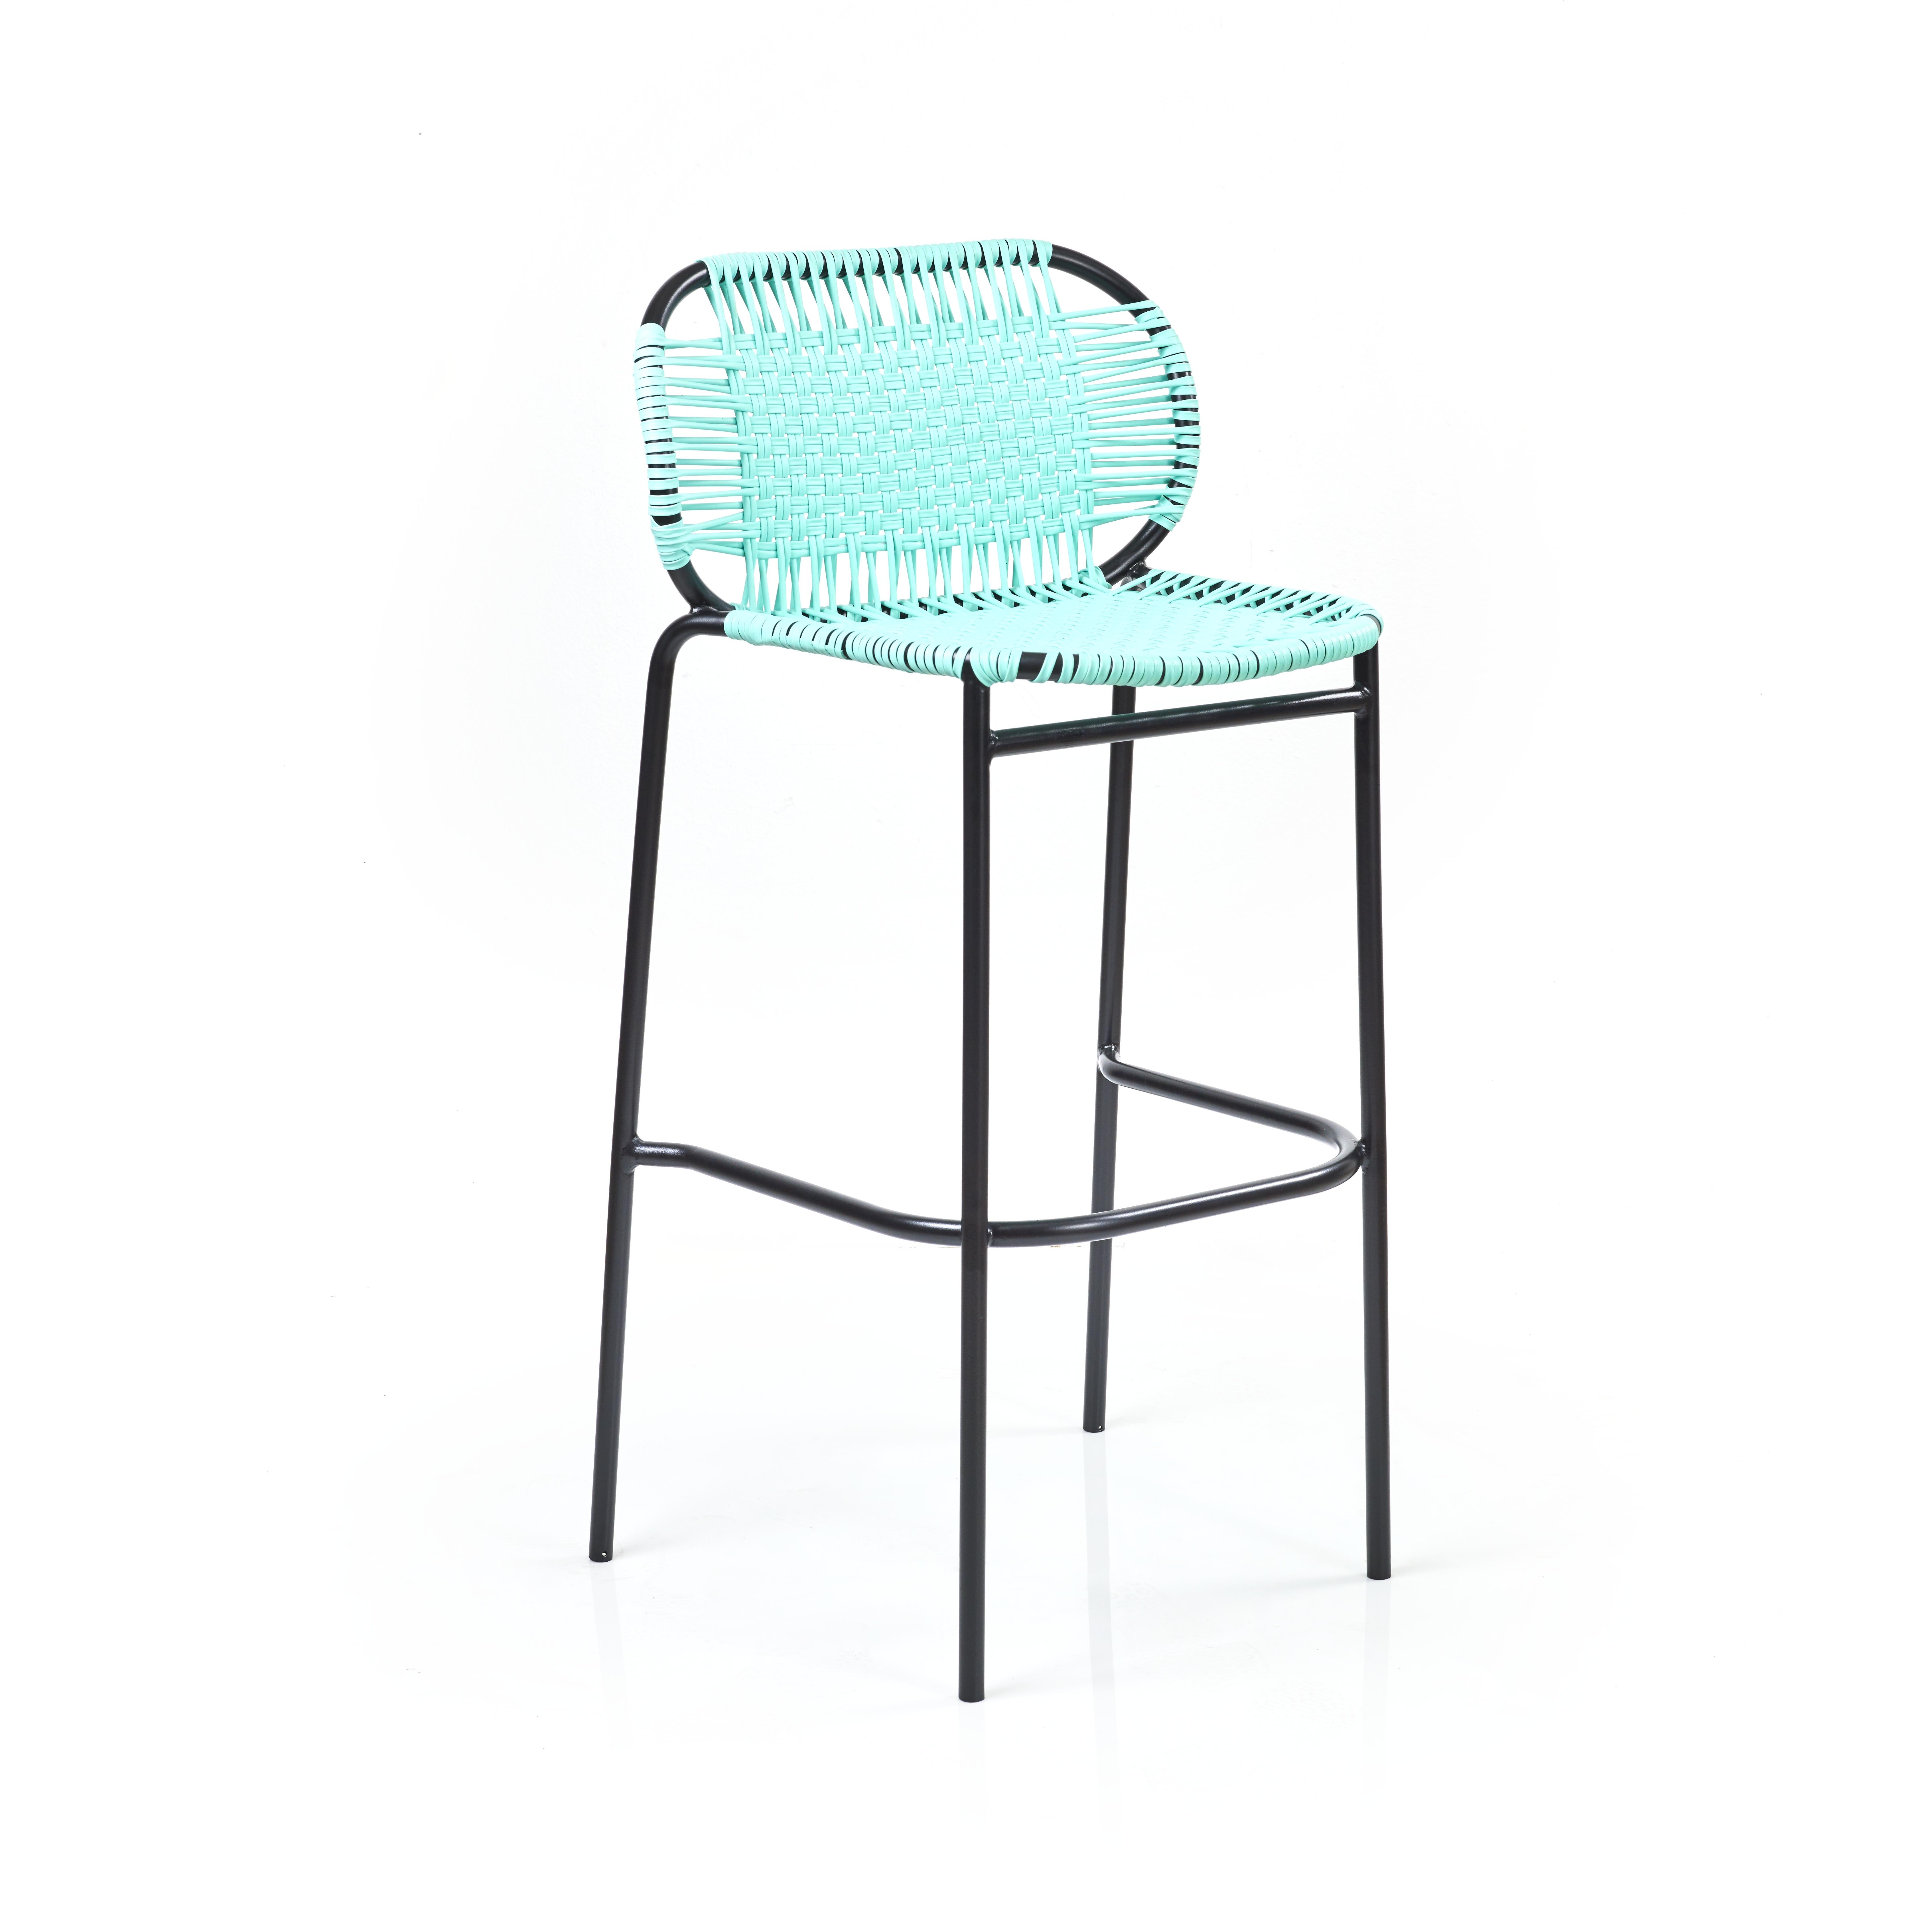 Mint Cielo bar stool by Sebastian Herkner
Materials: Galvanized and powder-coated tubular steel. PVC strings are made from recycled plastic.
Technique: Made from recycled plastic and weaved by local craftspeople in Cartagena, Colombia.